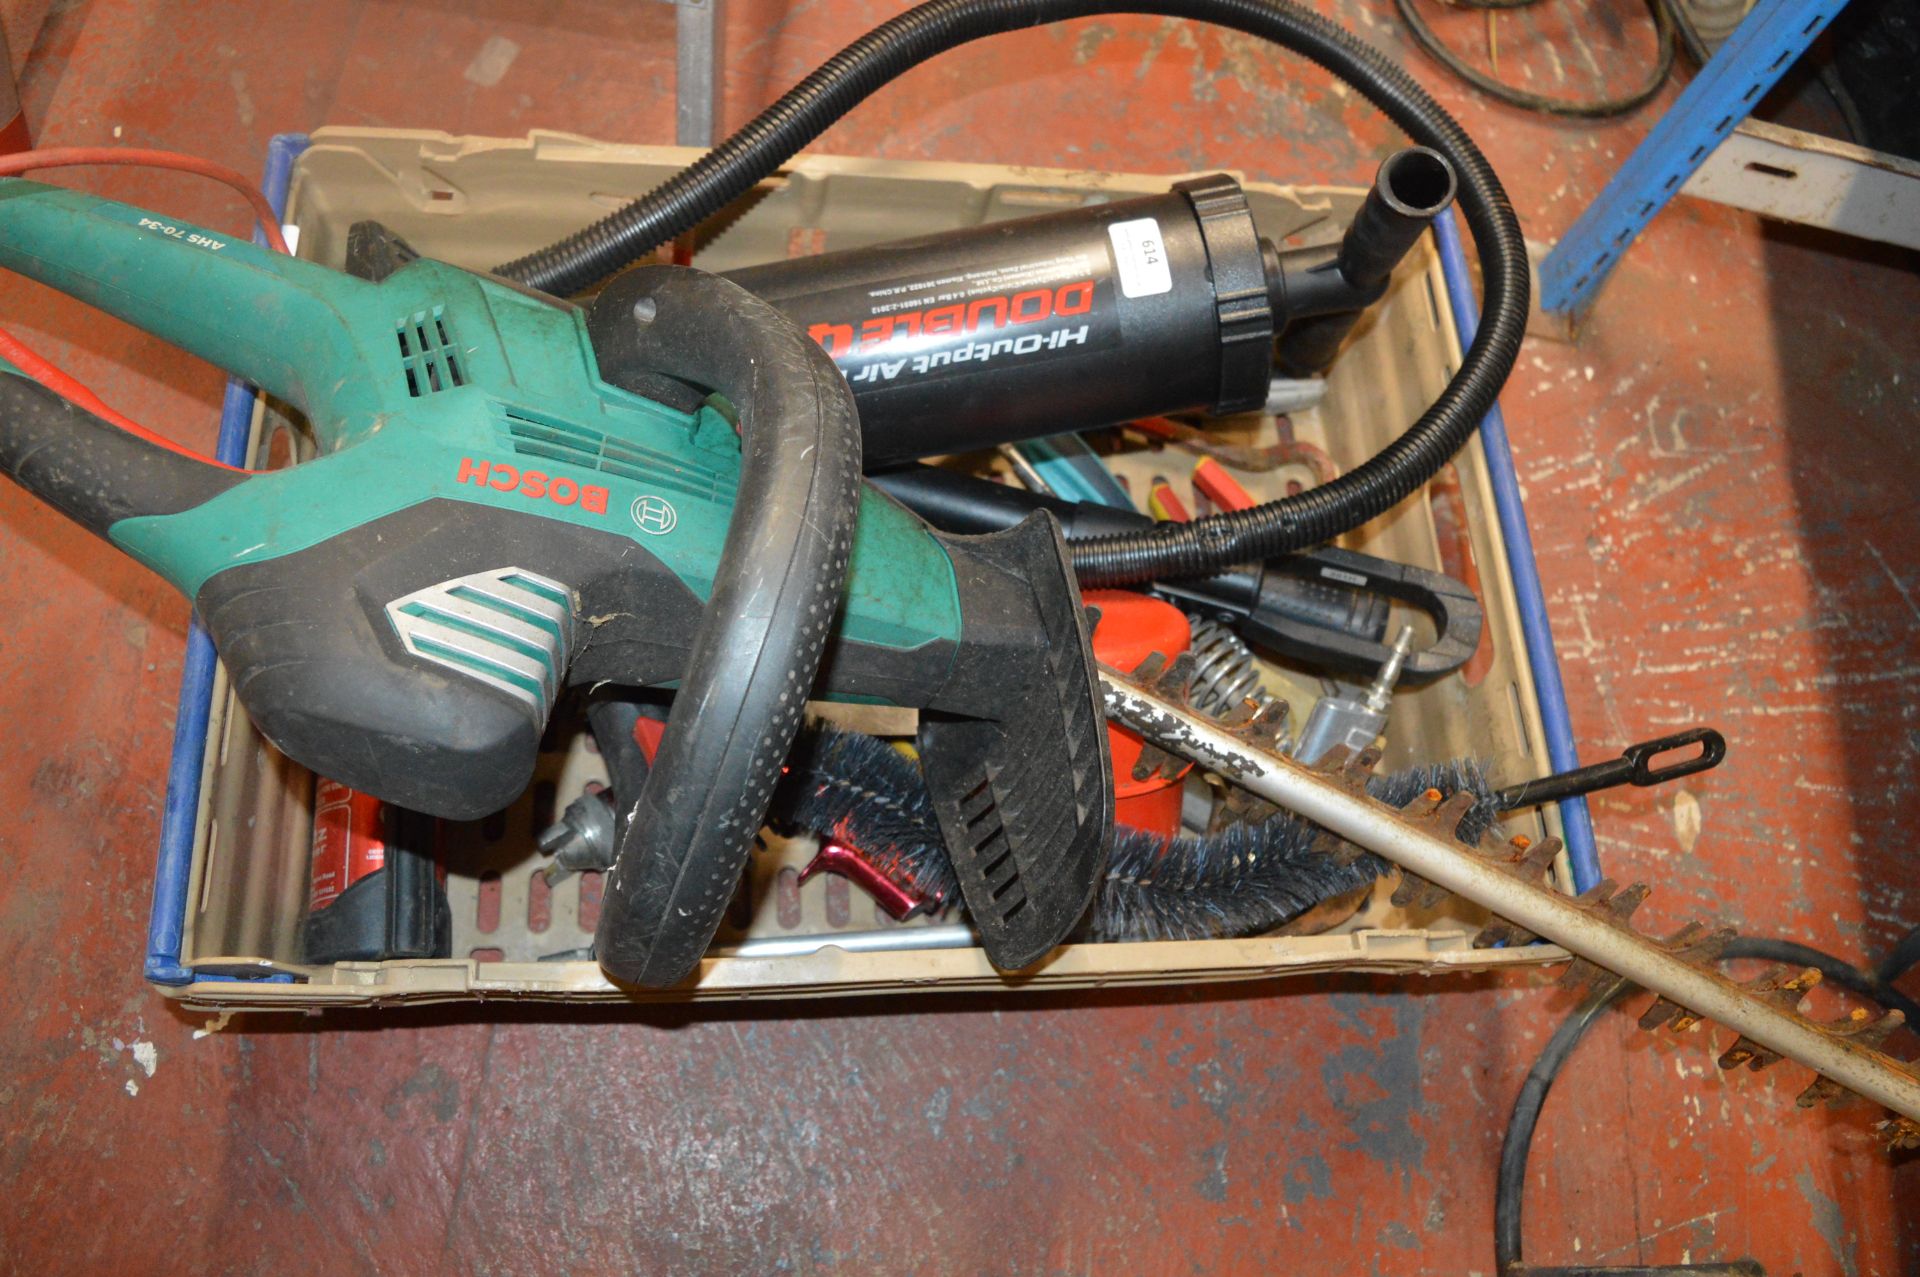 *Bosch Hedge Trimmer, Double Quick Air Pump, Spray Gun, and Assorted Tools